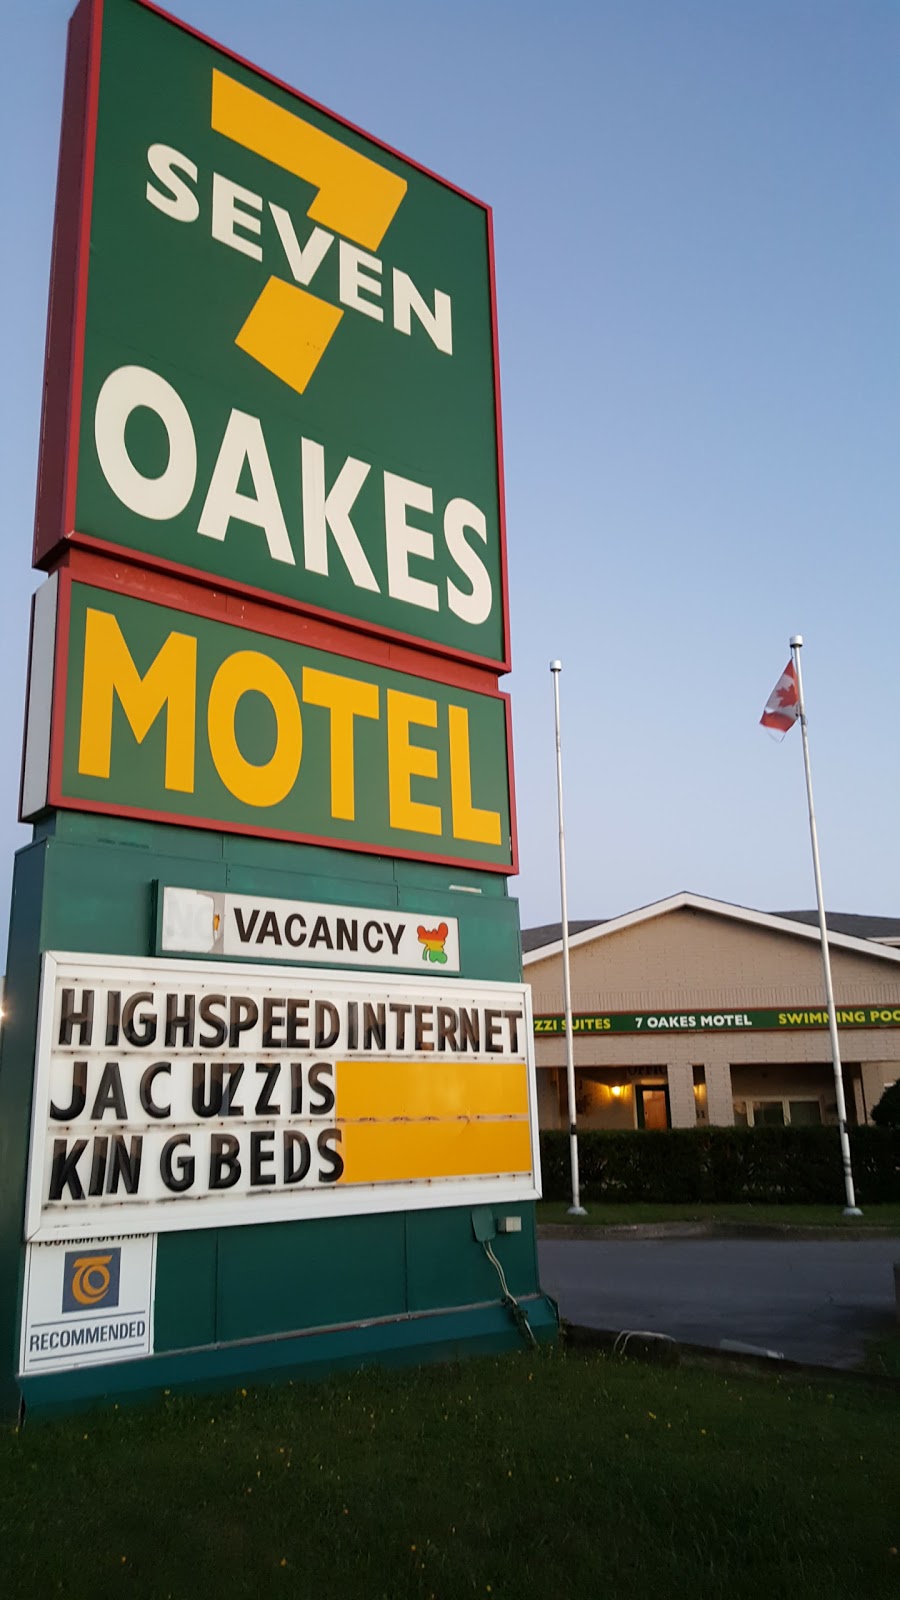 Seven Oakes Motel | lodging | 2331 Princess St, Kingston, ON K7M 3G1, Canada | 6135463655 OR +1 613-546-3655